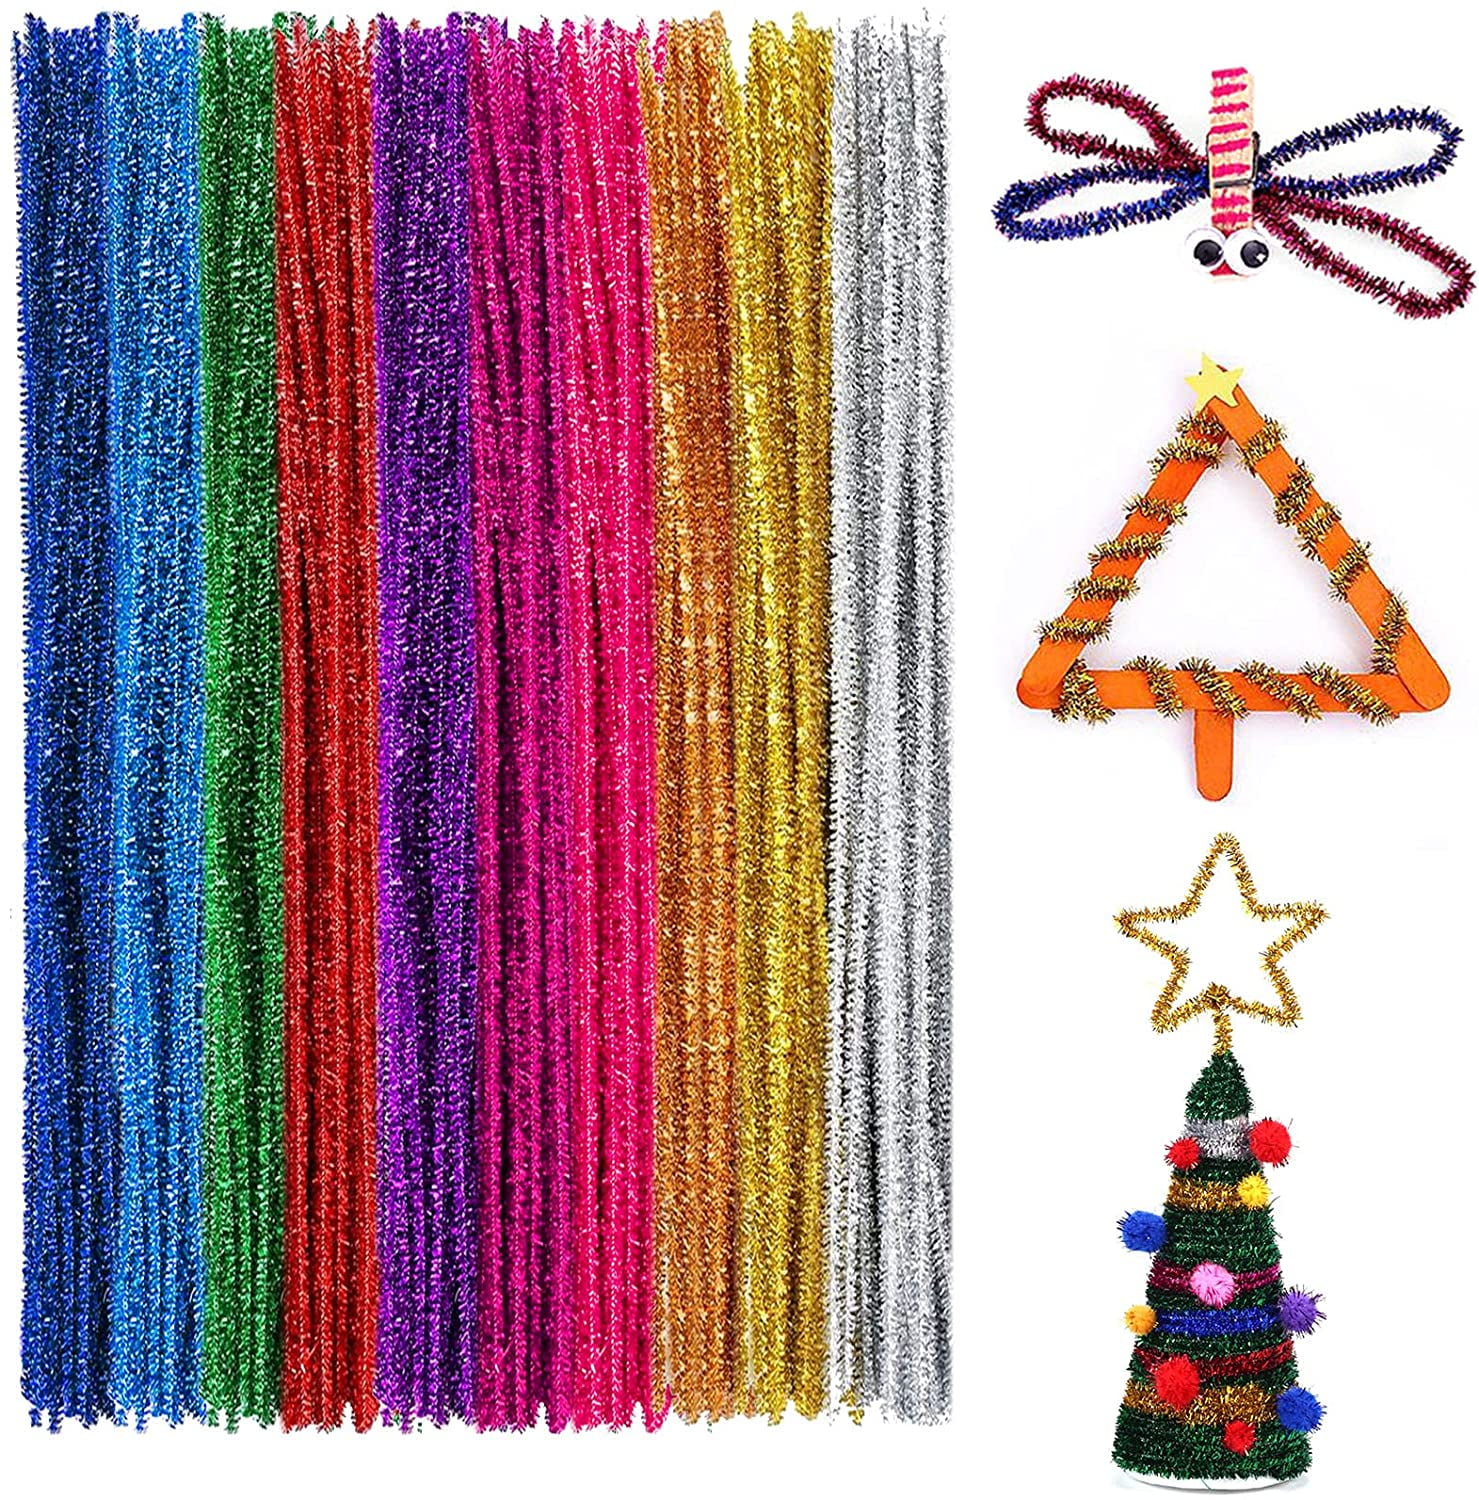 Black Set of 25 Metallic Tinsel Pipe Cleaners for Kids Crafts Embellishing and Group Projects Choose Color 